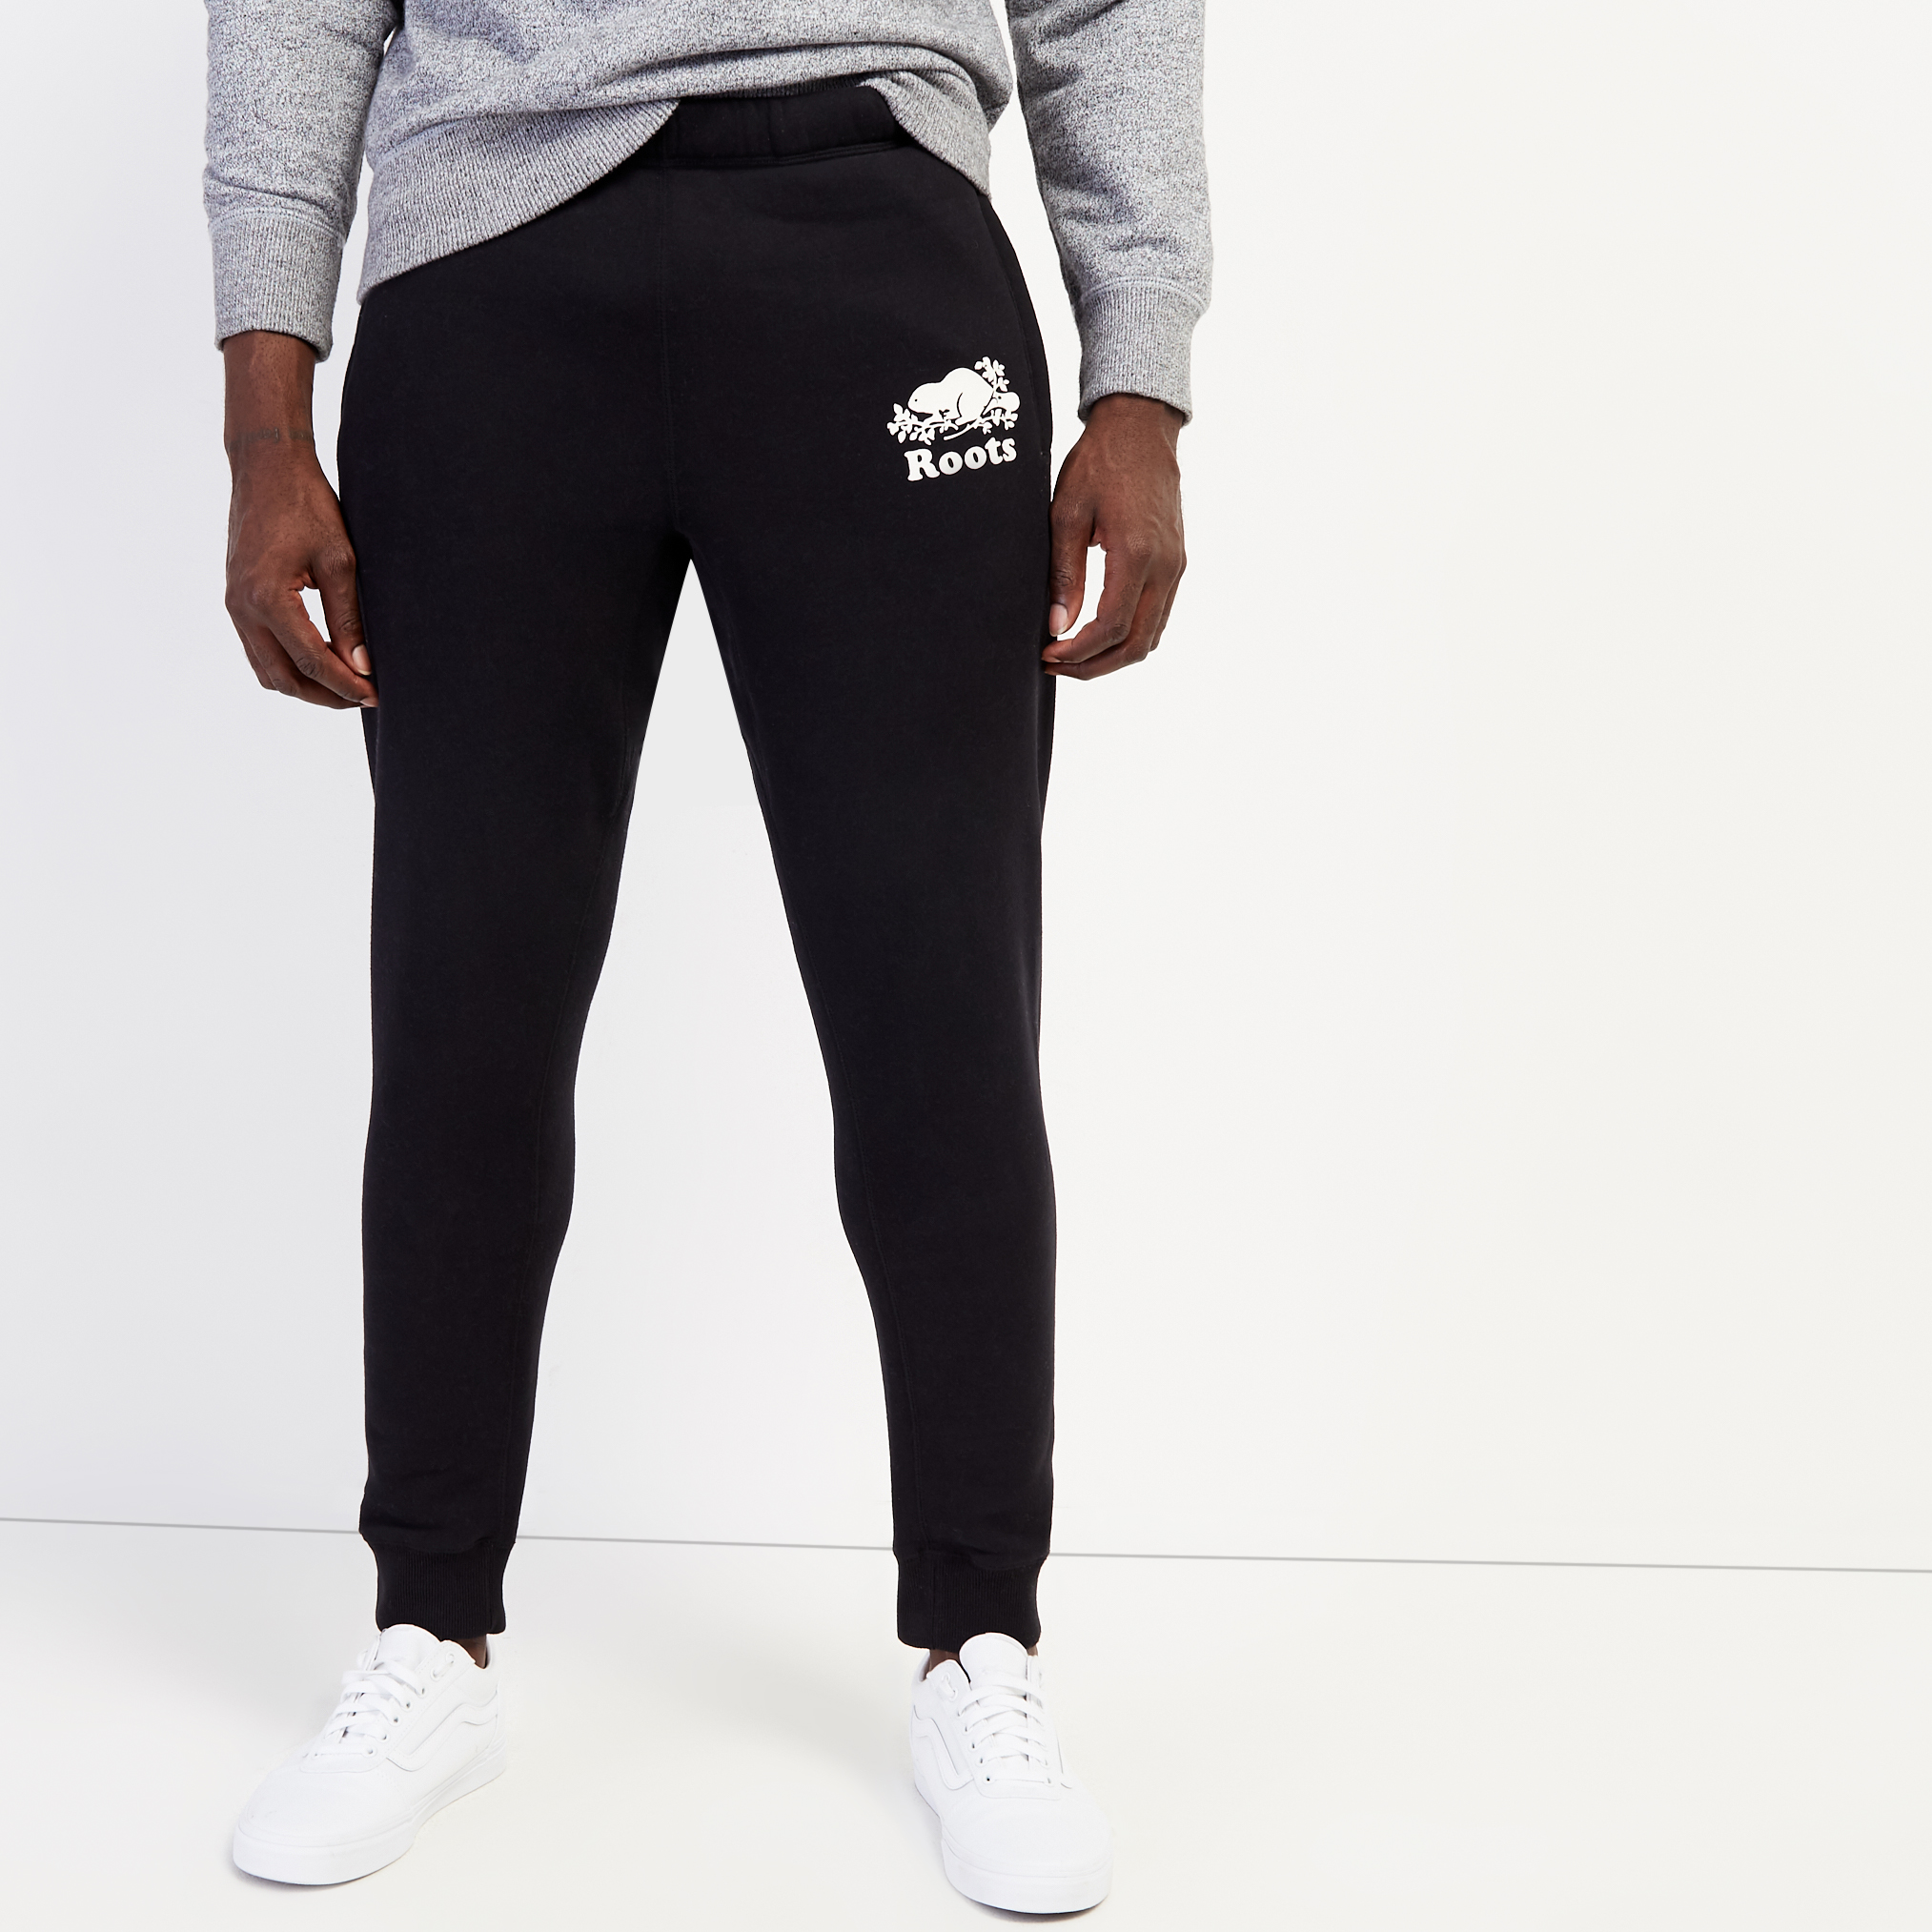 Roots Park Slim Sweatpant Tall (32 Inch Inseam) in Black